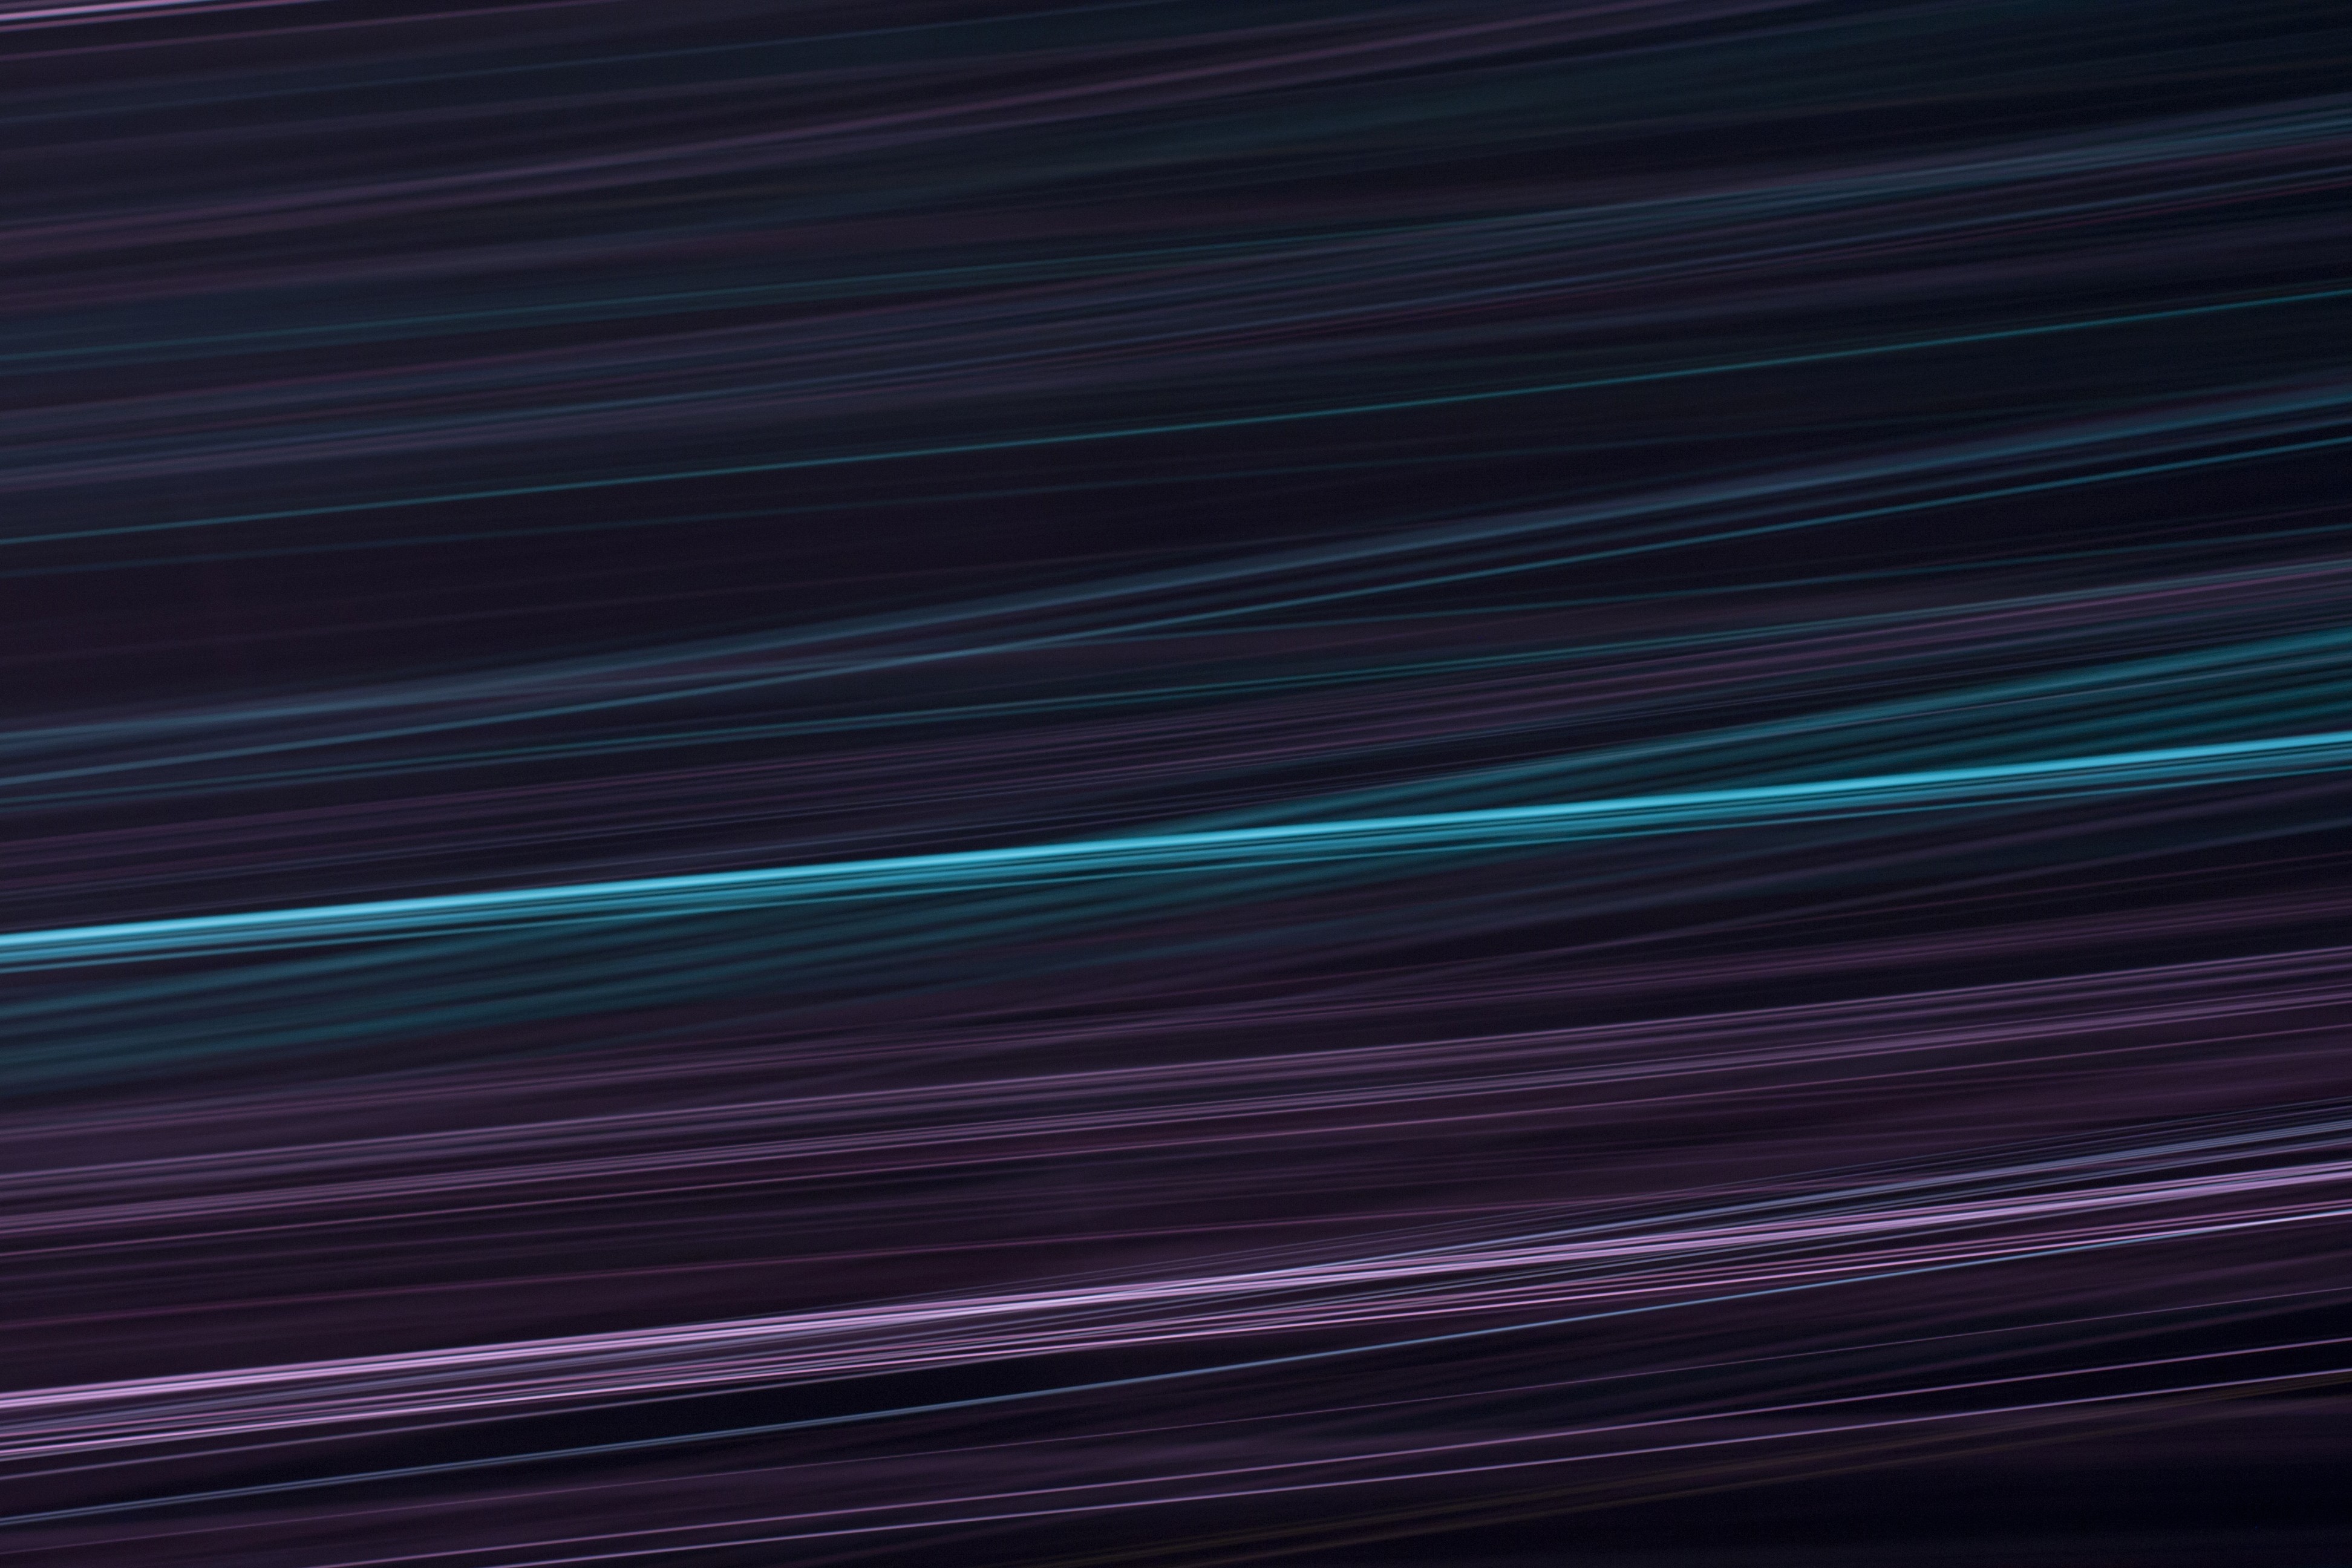 General 3888x2592 minimalism lines abstract